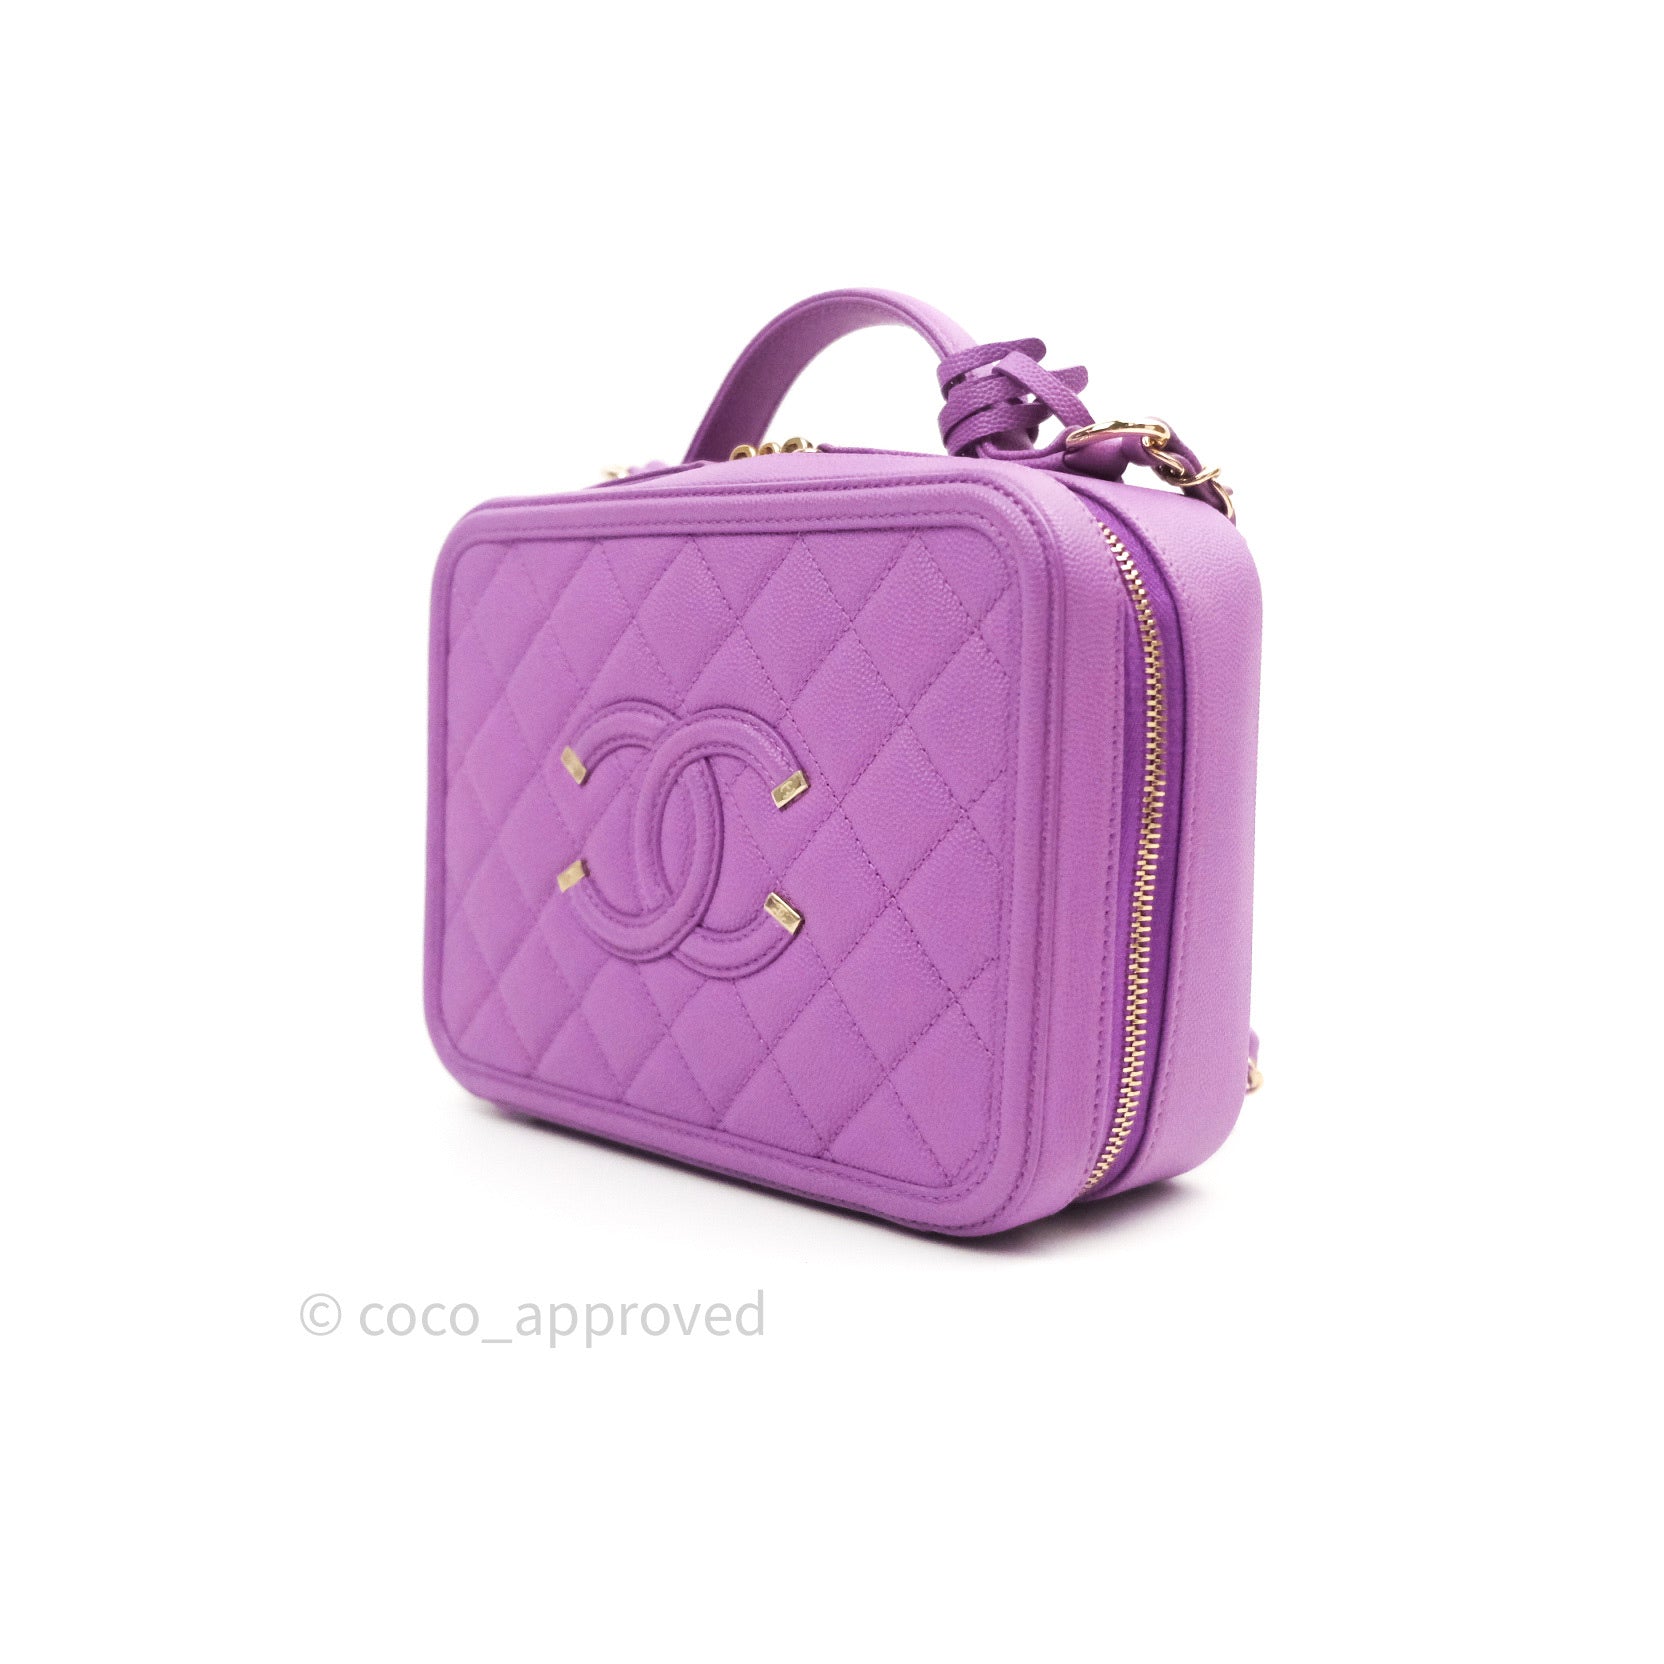 CHANEL Caviar Quilted Mini Vanity Case With Chain Purple 548883